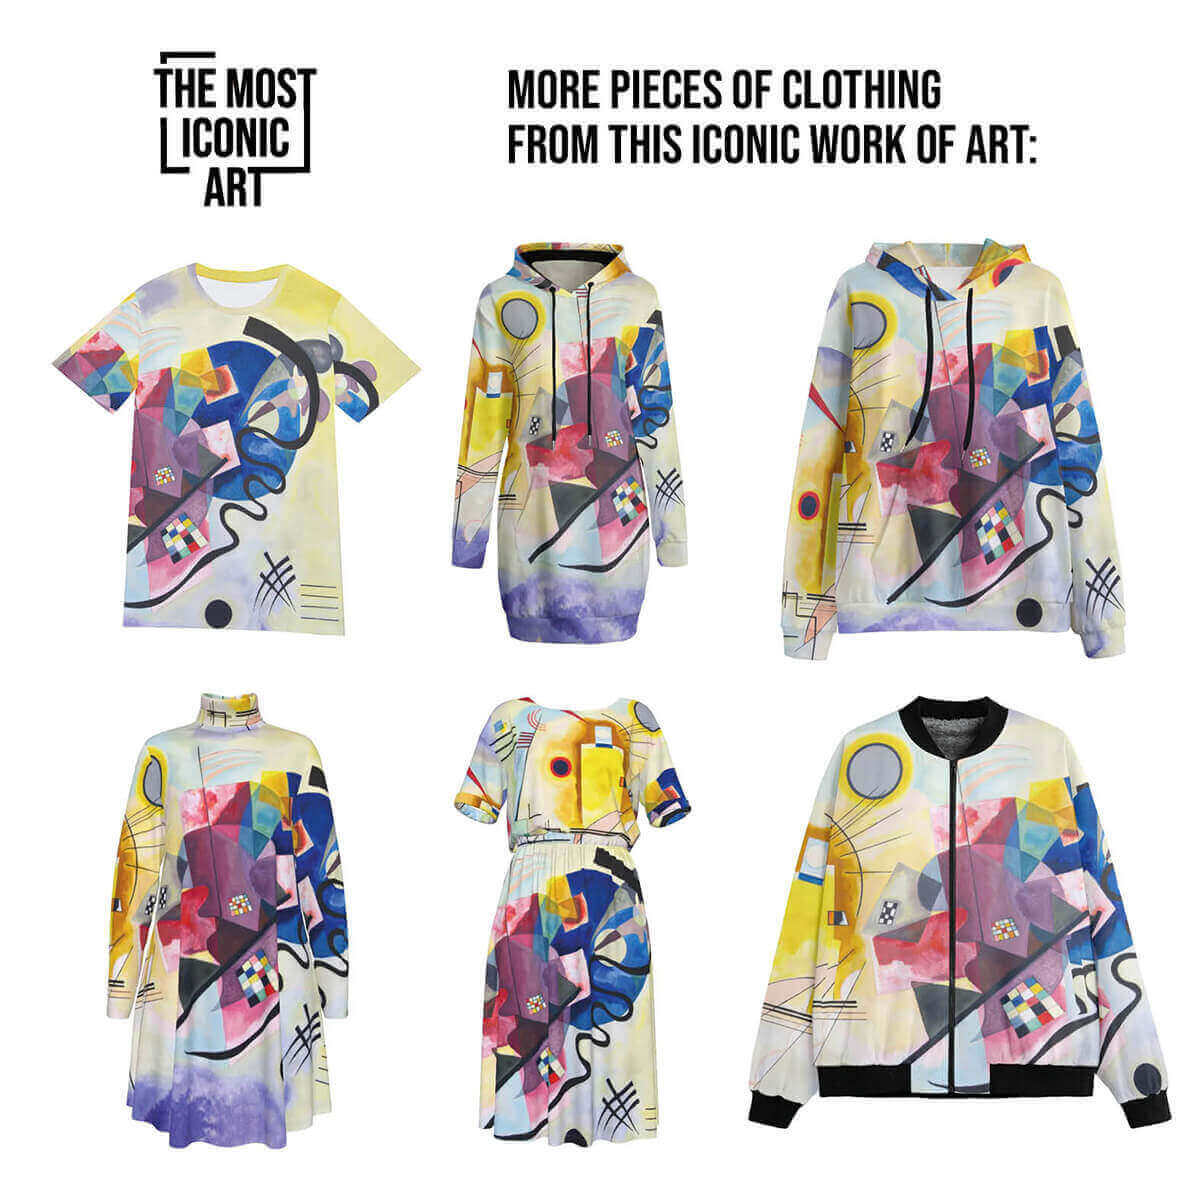 Colorful women's clothing by Kandinsky